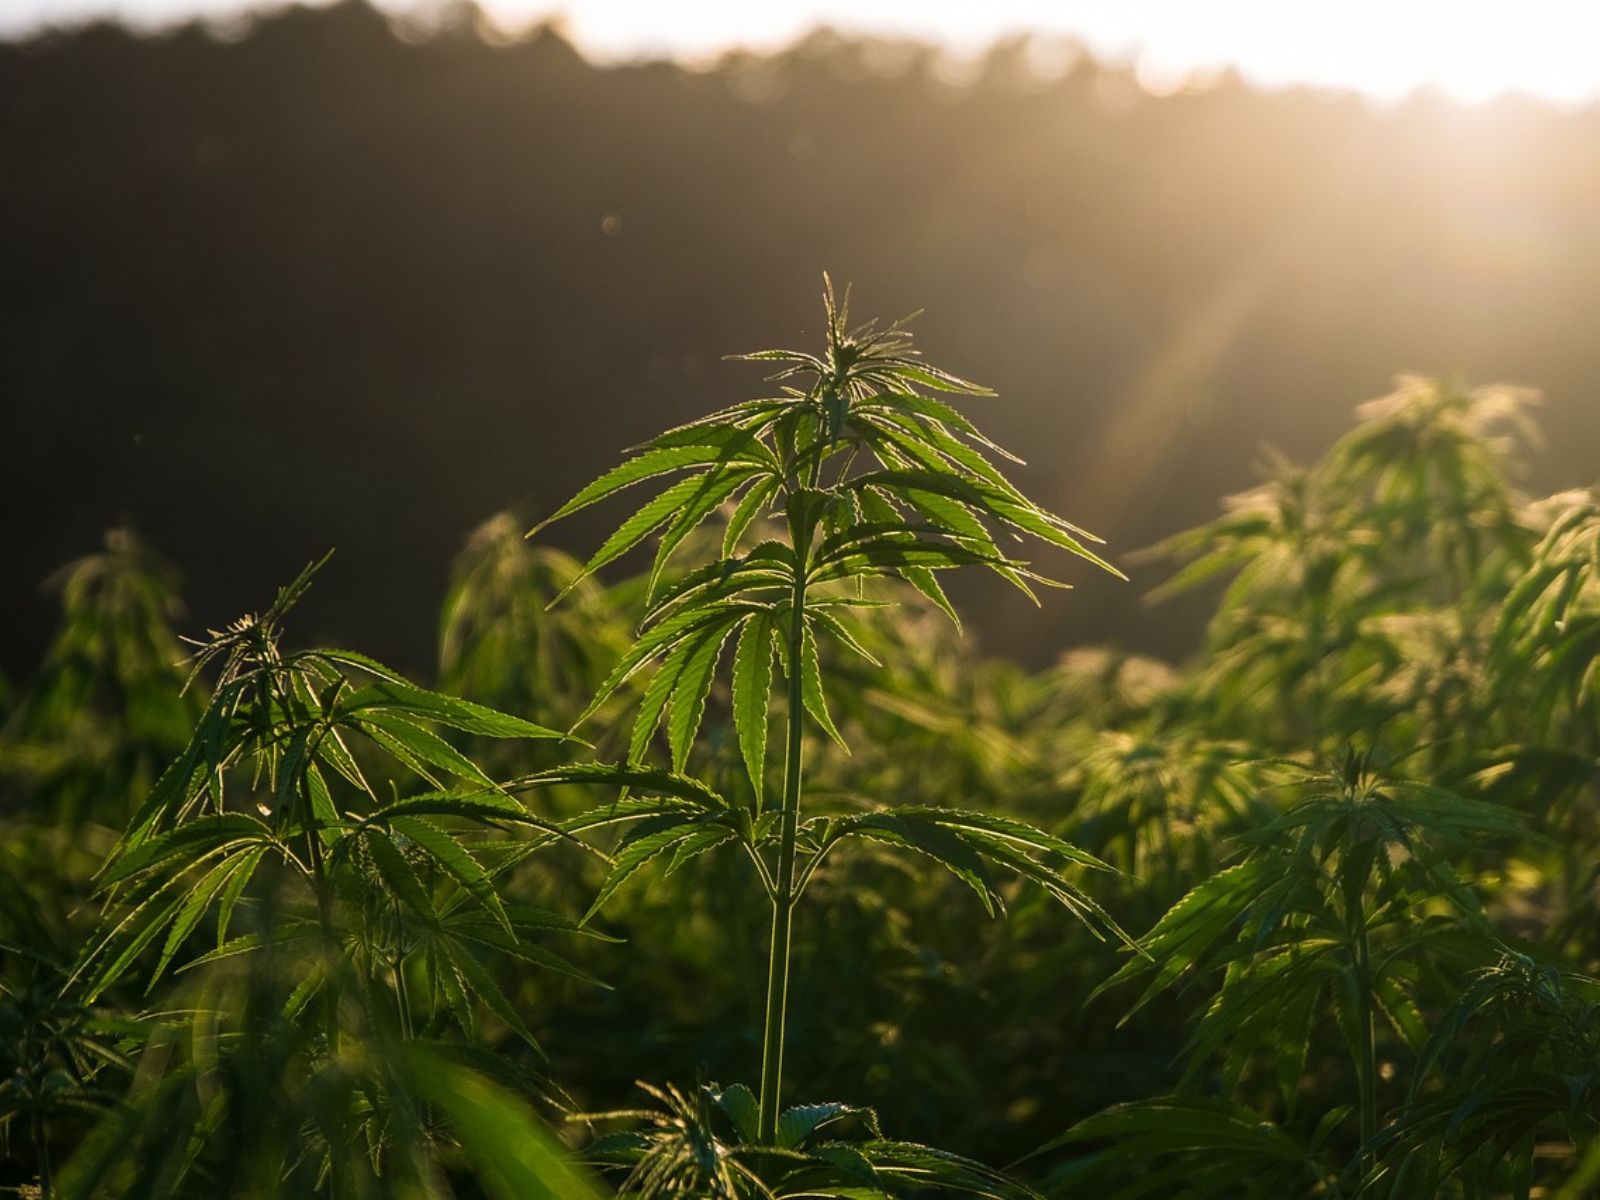 Global Industrial Hemp Market Estimated To Grow By $6.87 Billion From 2023 To 2027